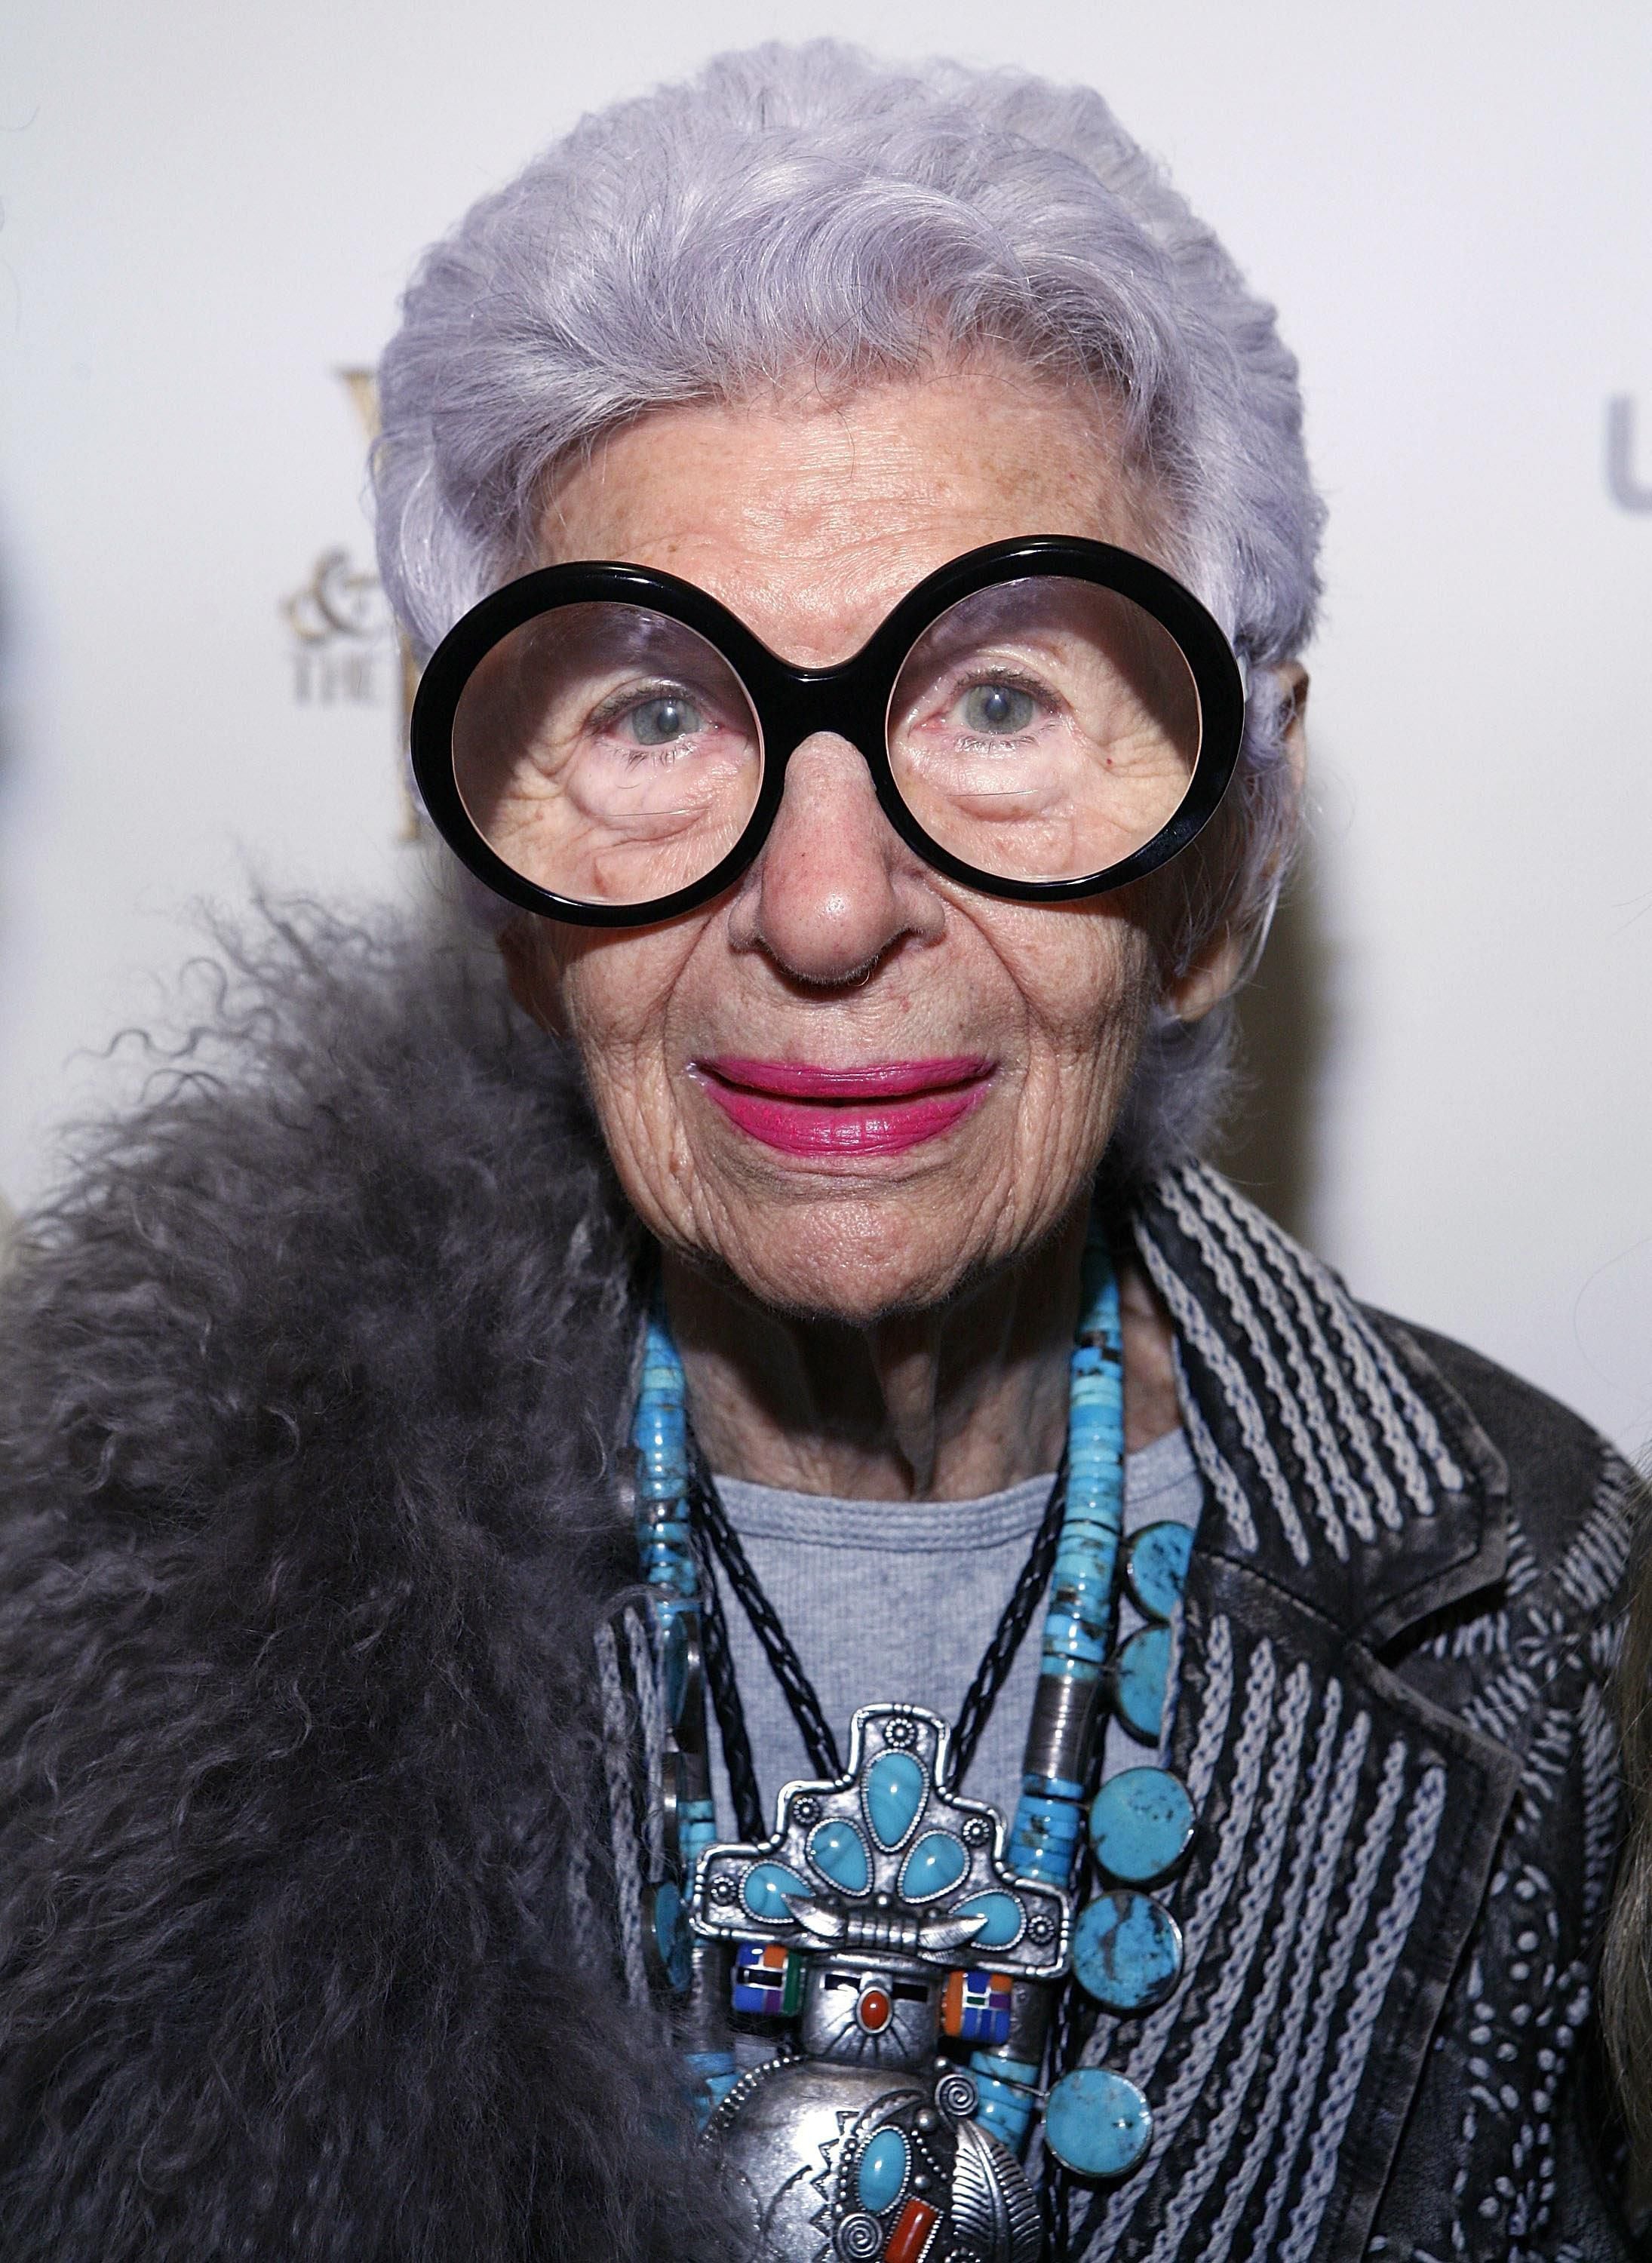 iris apfel: the 'accidental icon' who was an unforgettable fashionable centenarian